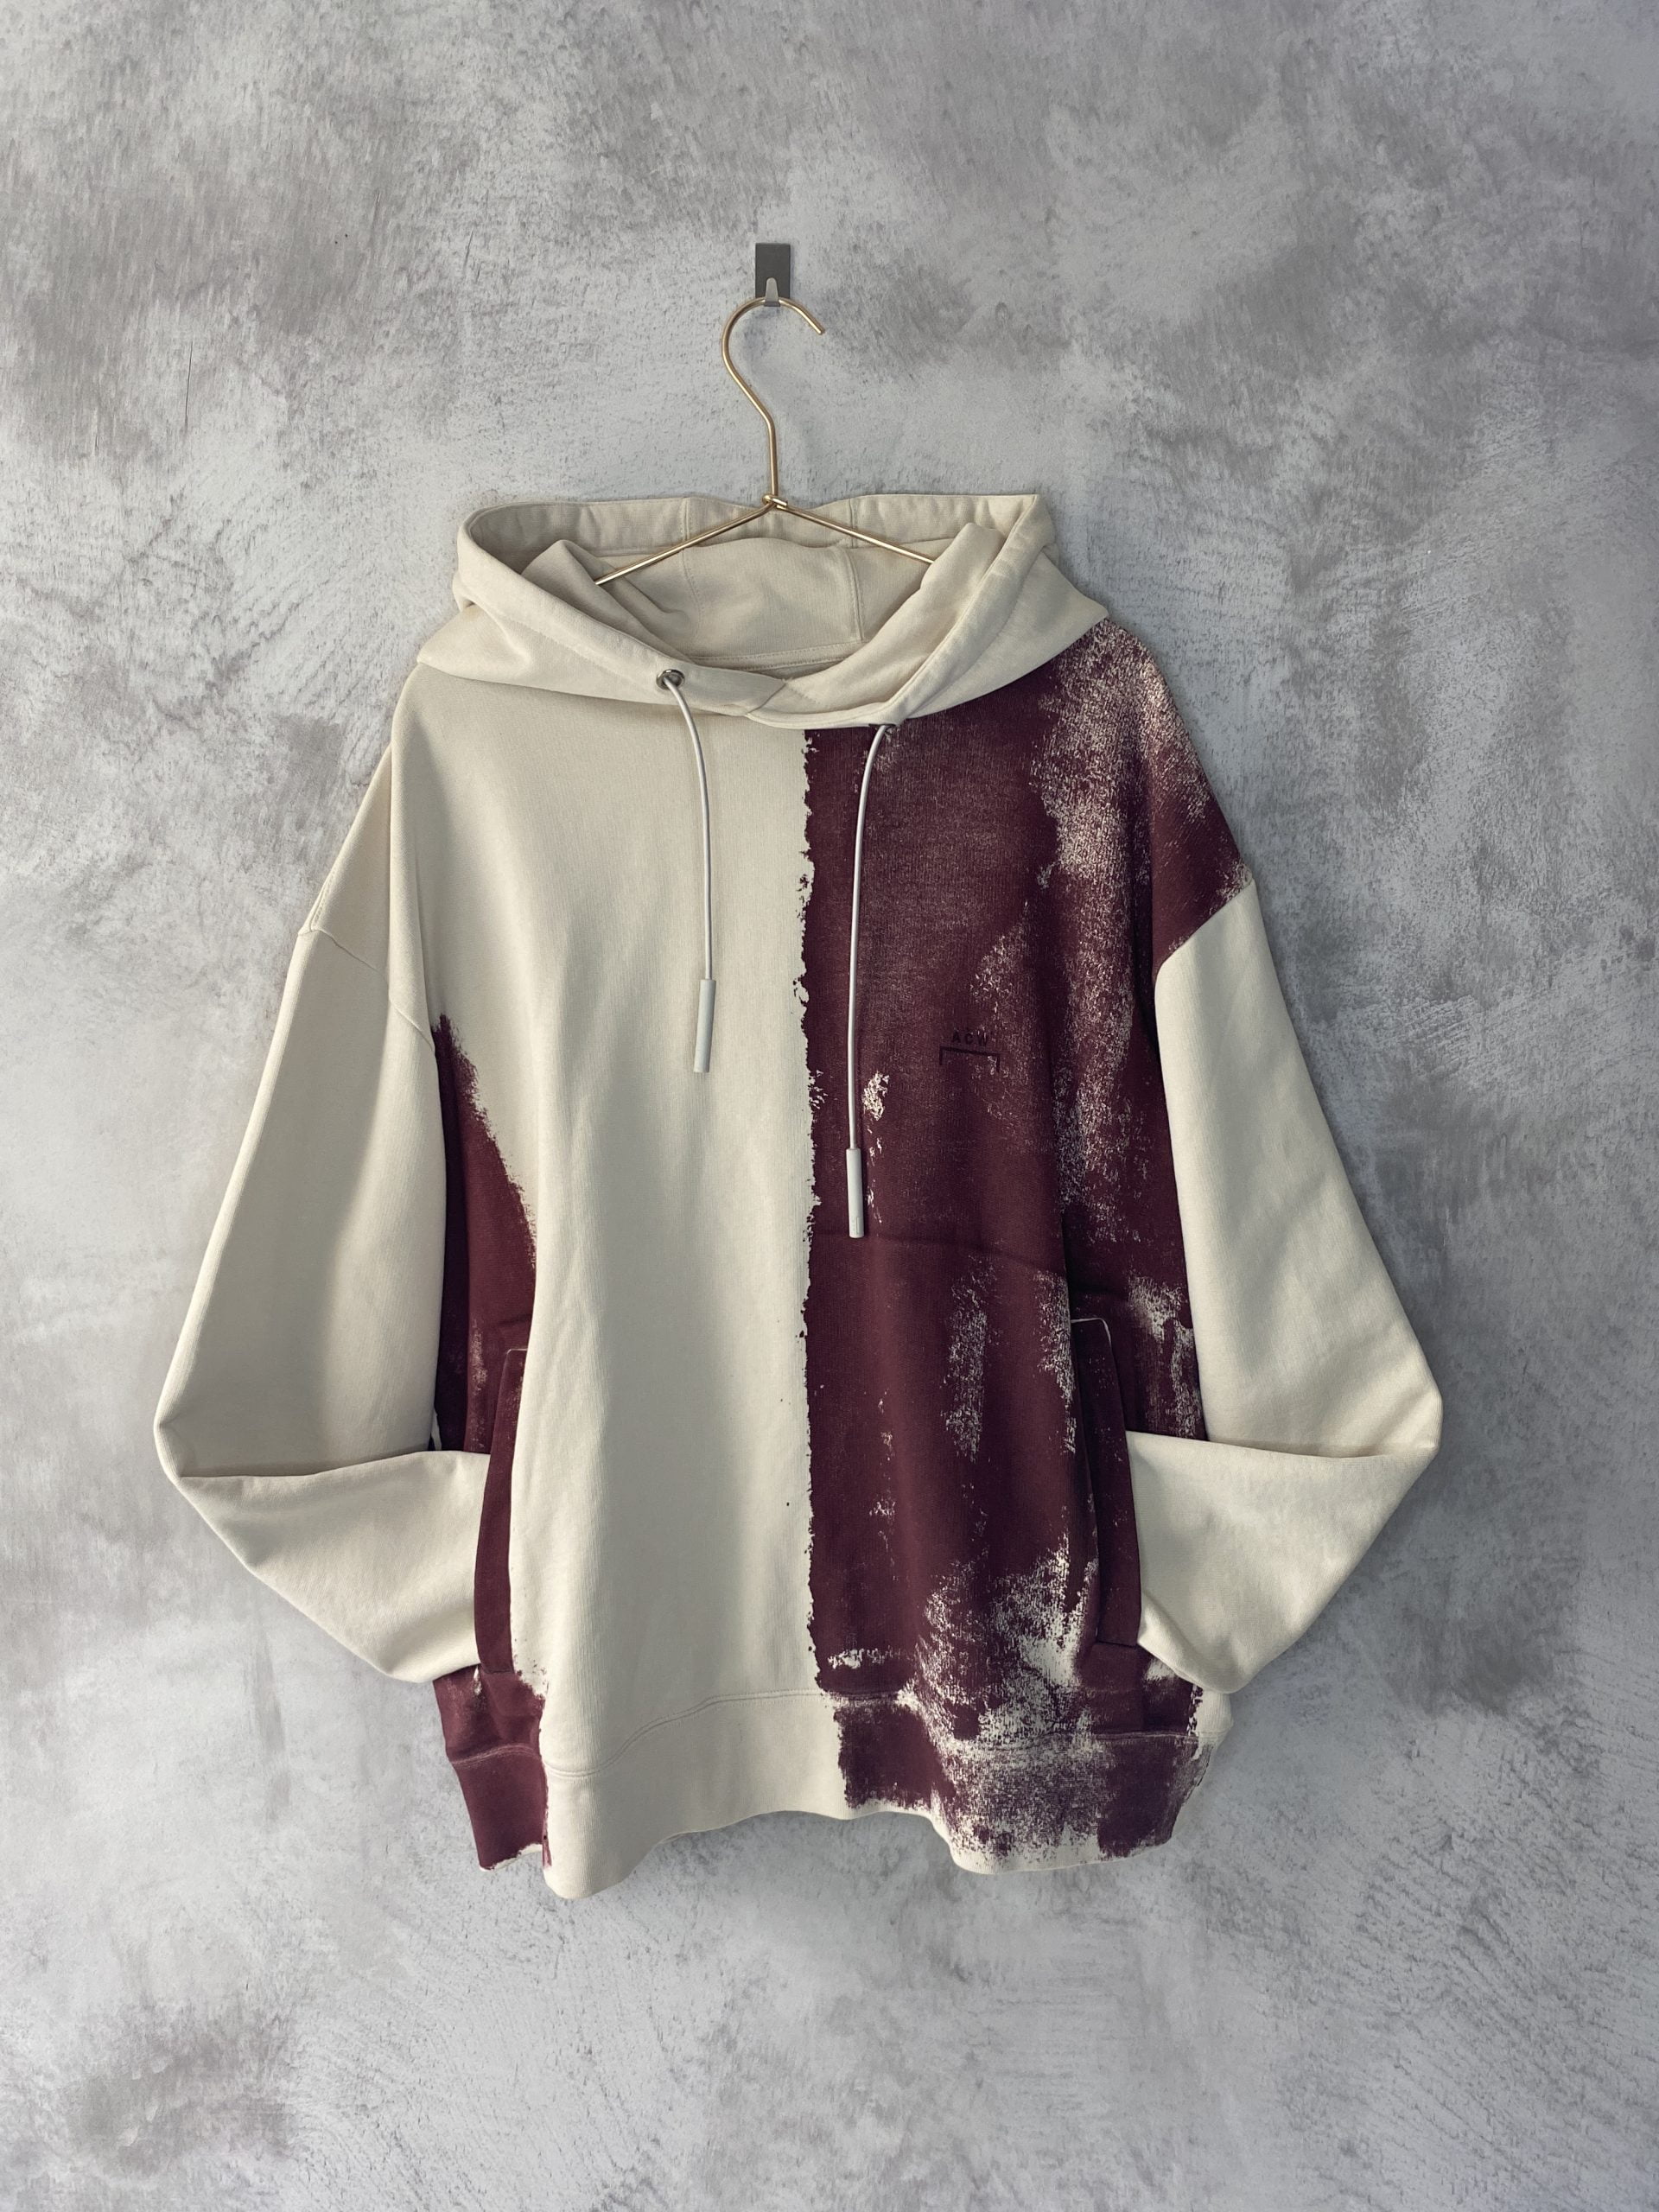 clothing manufactures CFB textile in Europe for HQ garments hoodie Acid wash